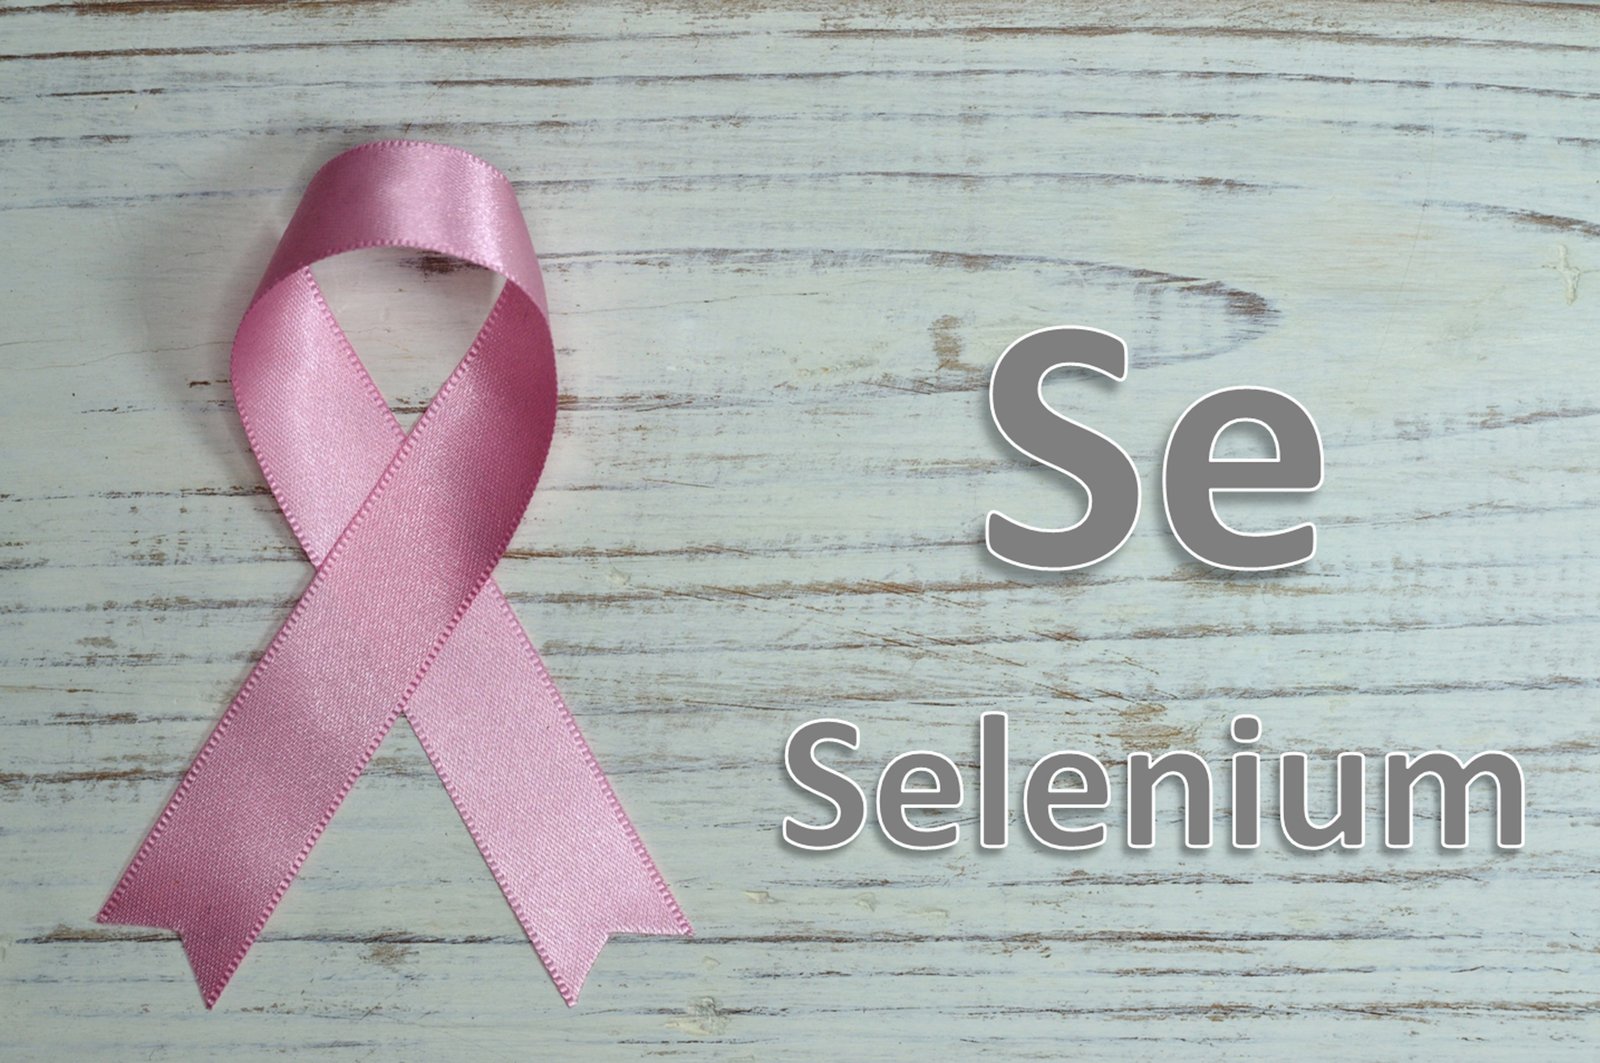 DoesItWorkSummary Selenium for Prevention of Cancer